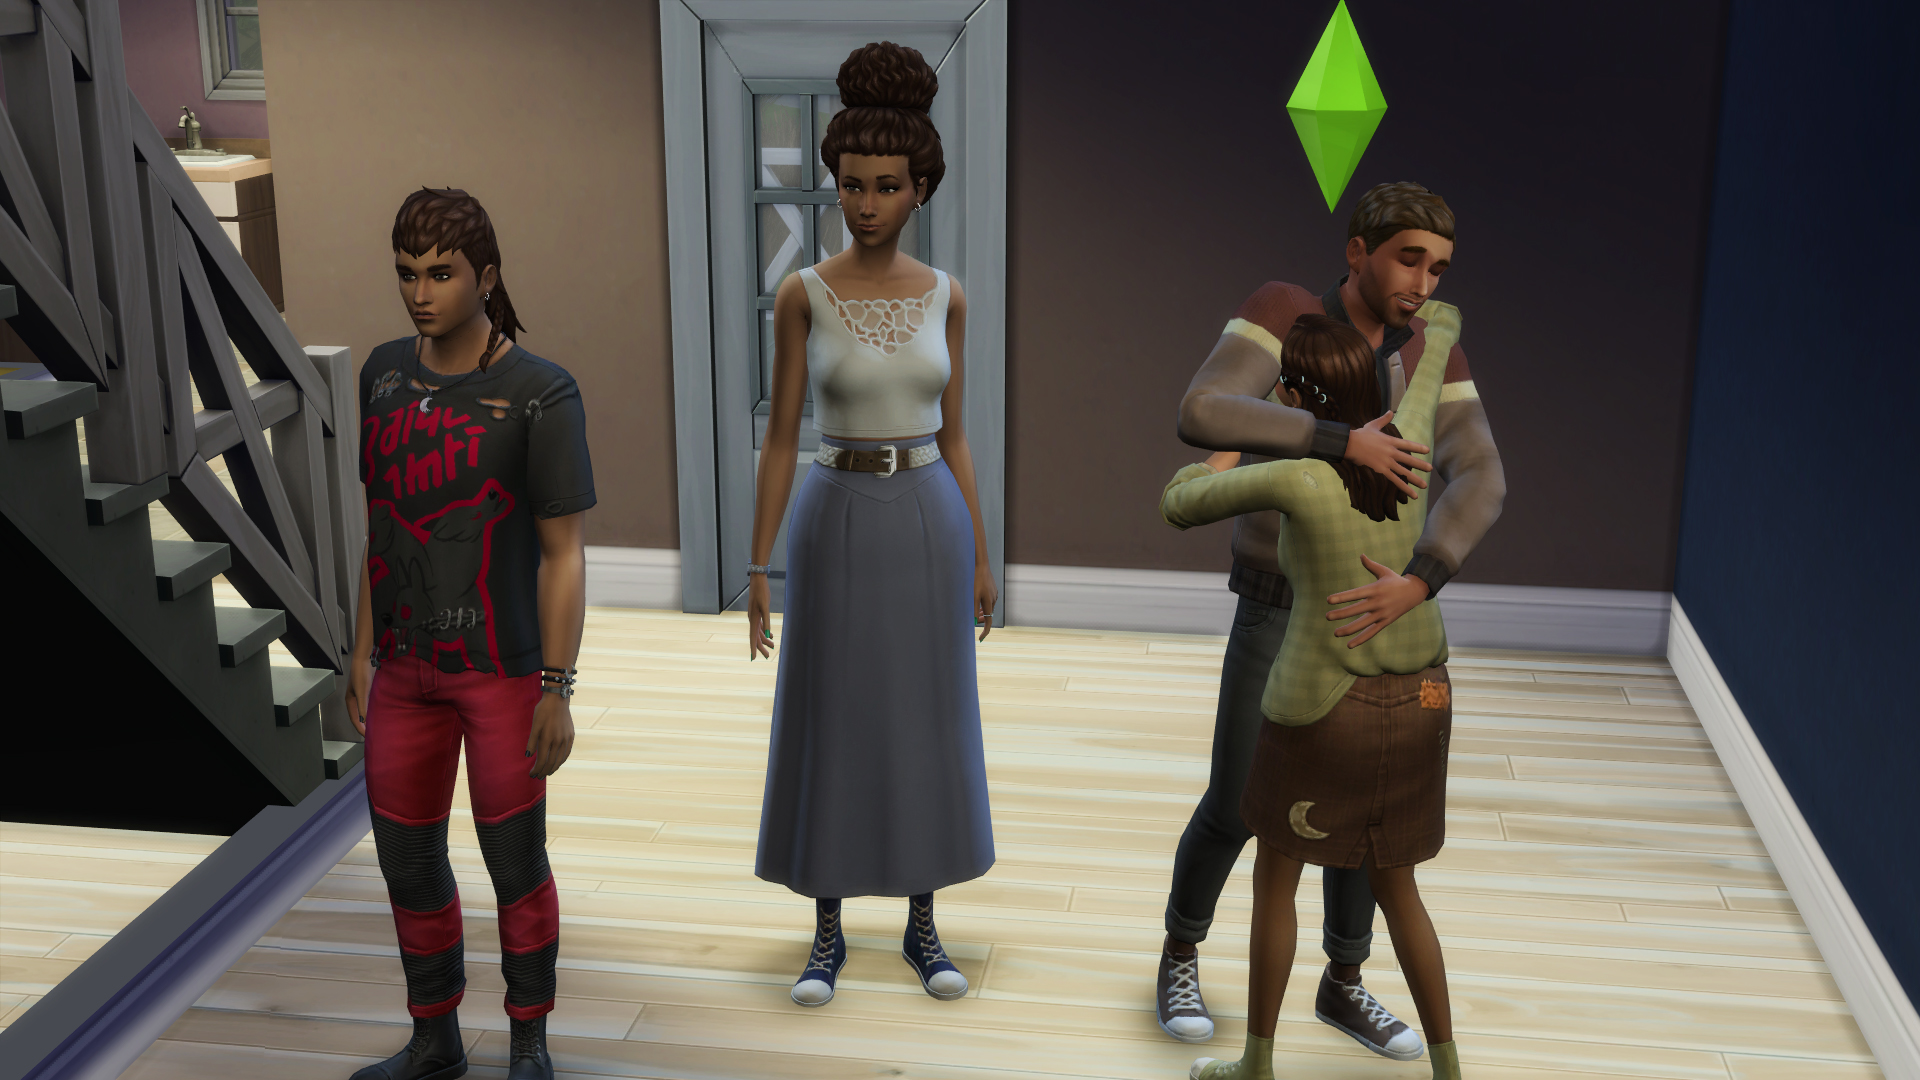 the sims 4 height mod